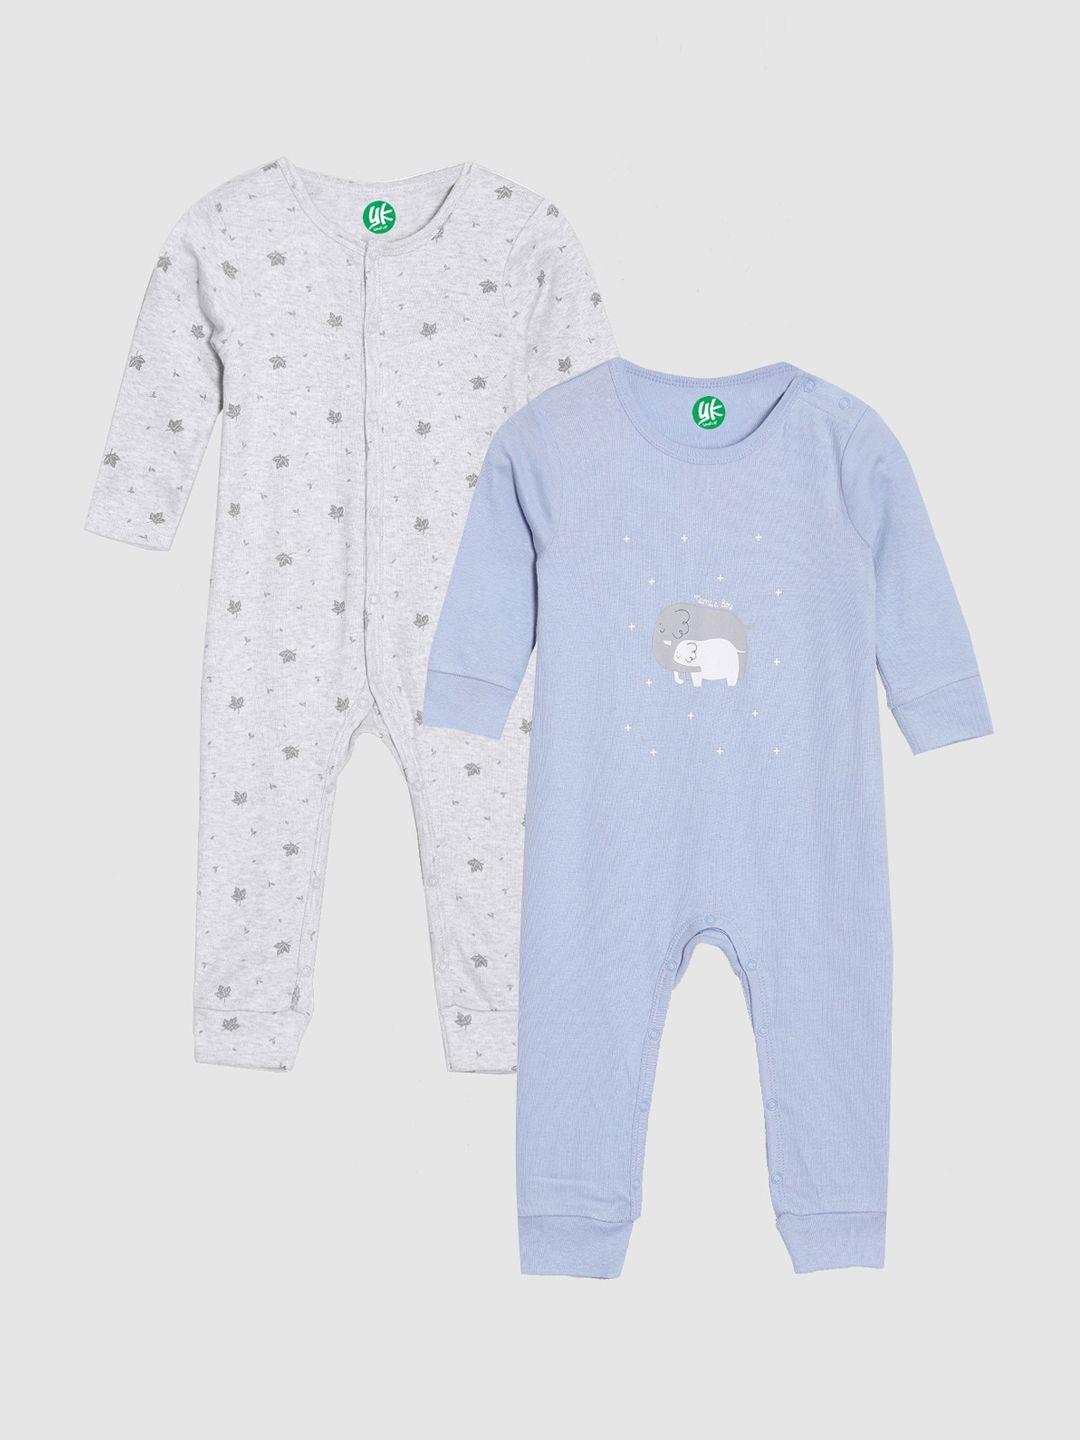 yk organic infant boys pack of 2 grey and blue printed organic cotton rompers